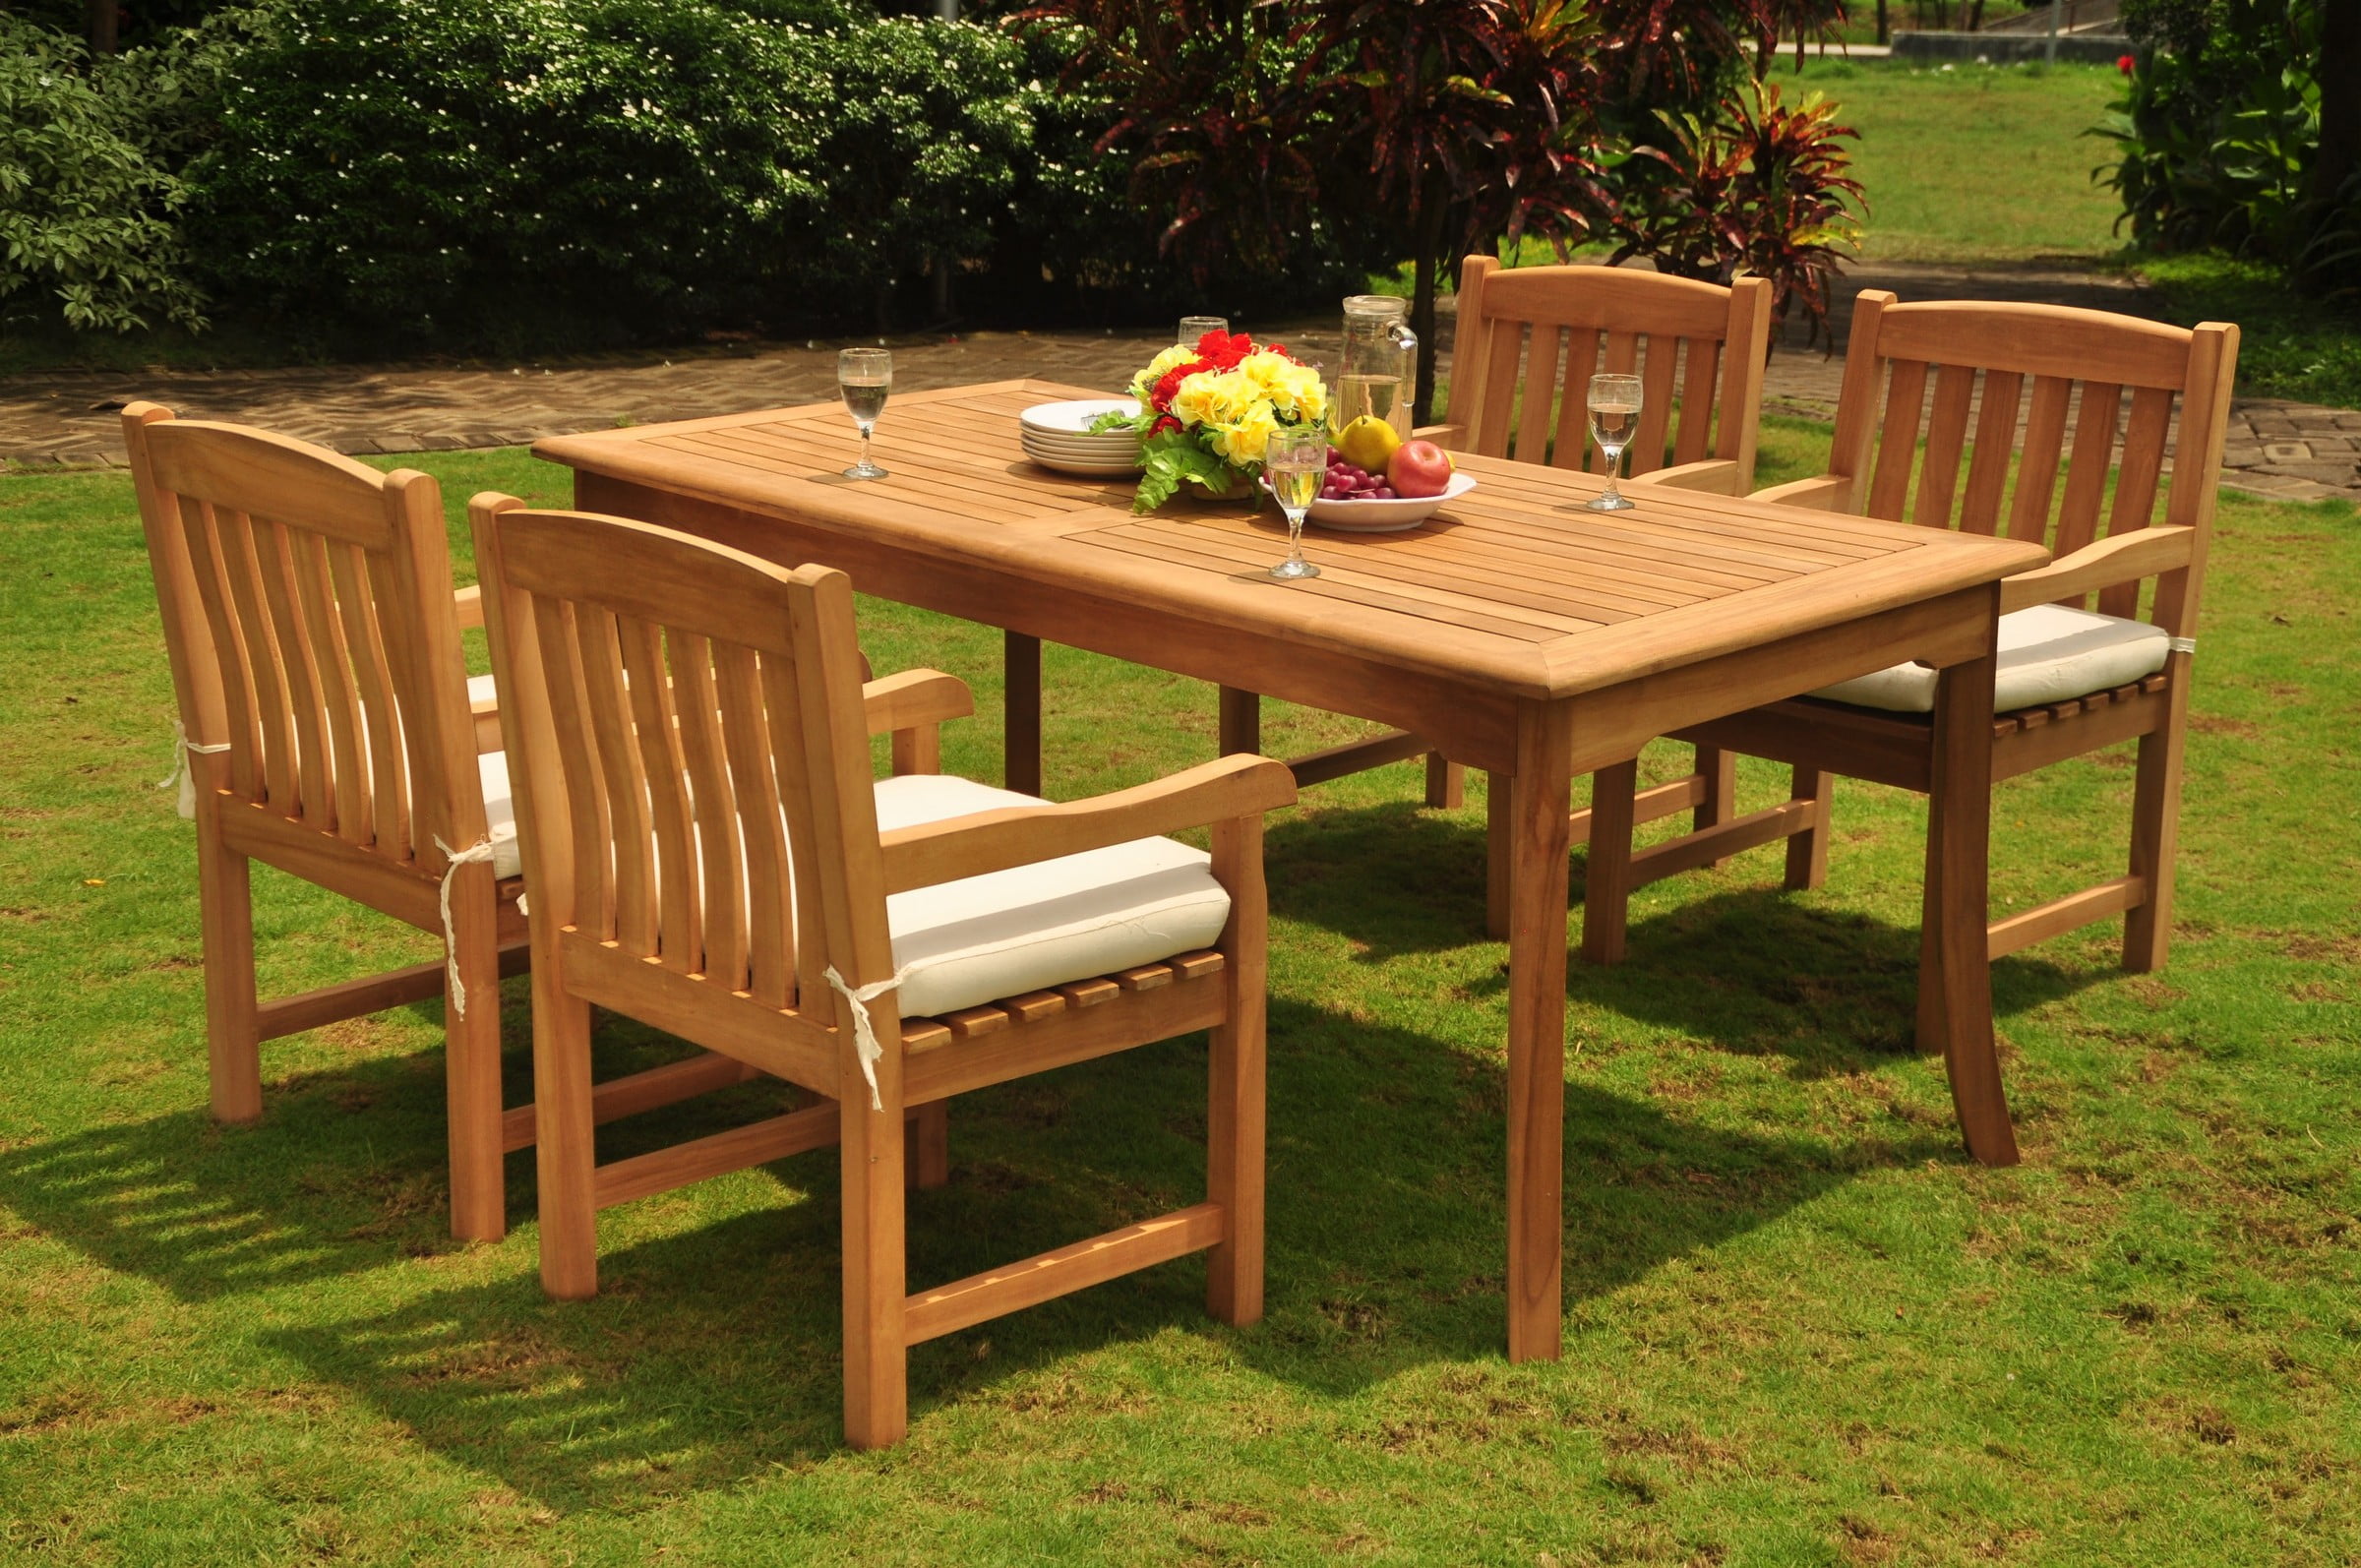 Affordable Teak Dining Table: Quality Furniture On A Budget